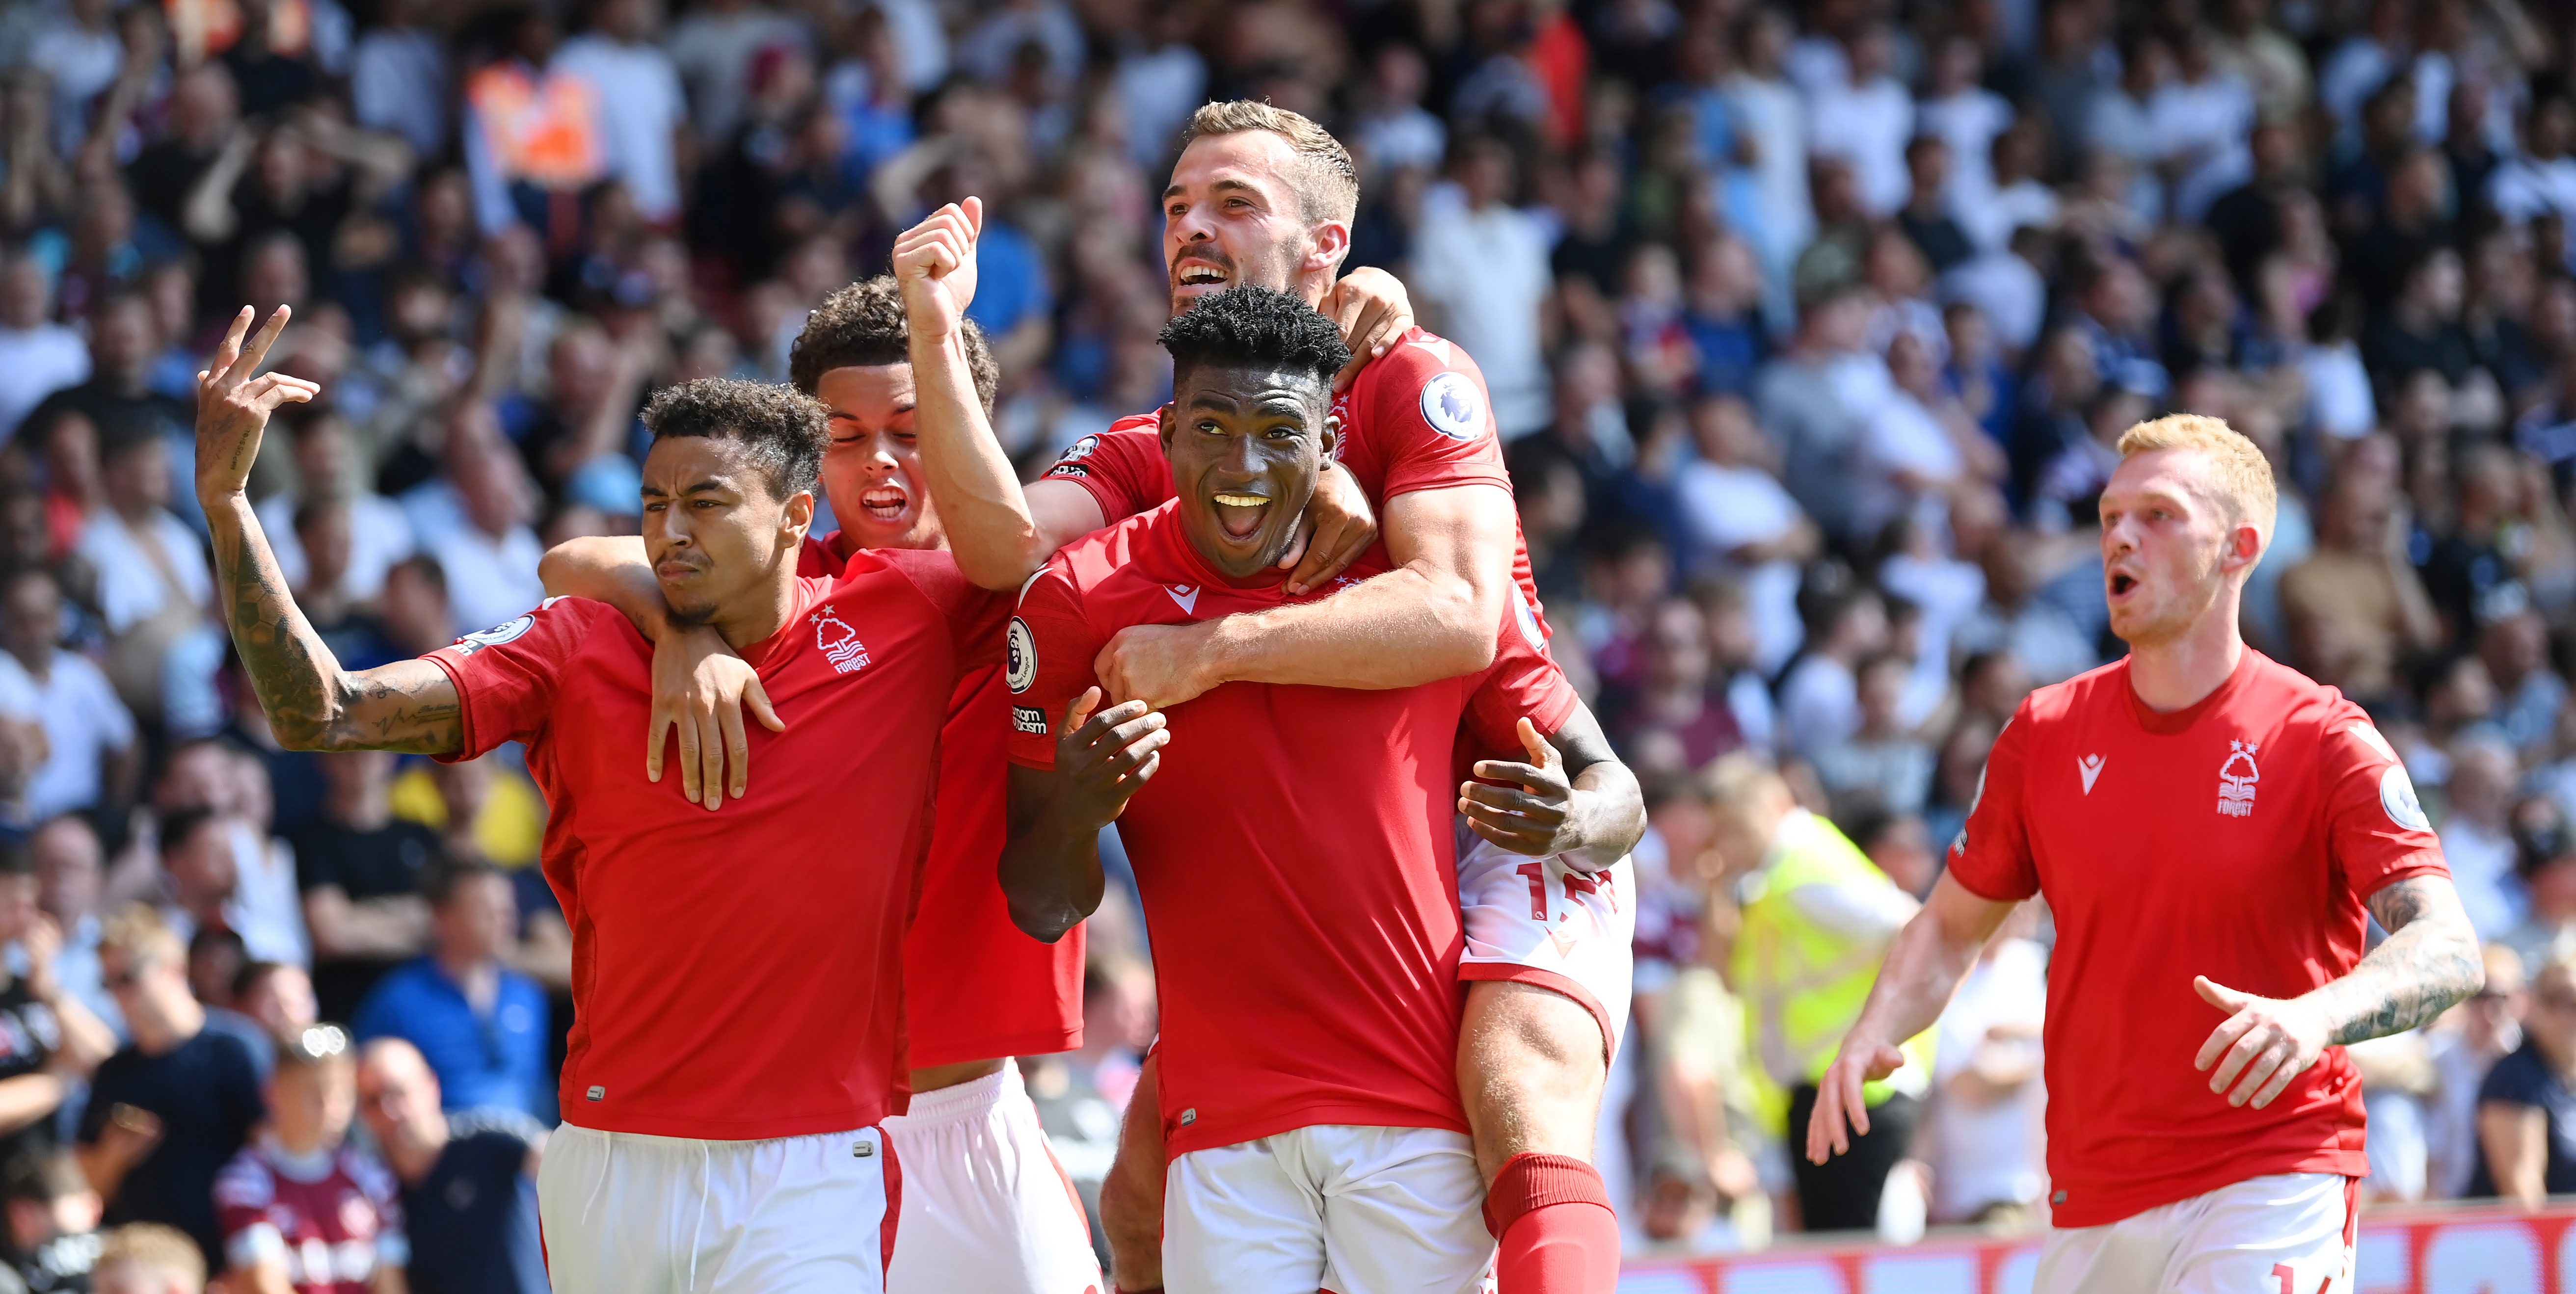 WATCH: Nottingham Forest Scores First Premier League Goal in 23 Years